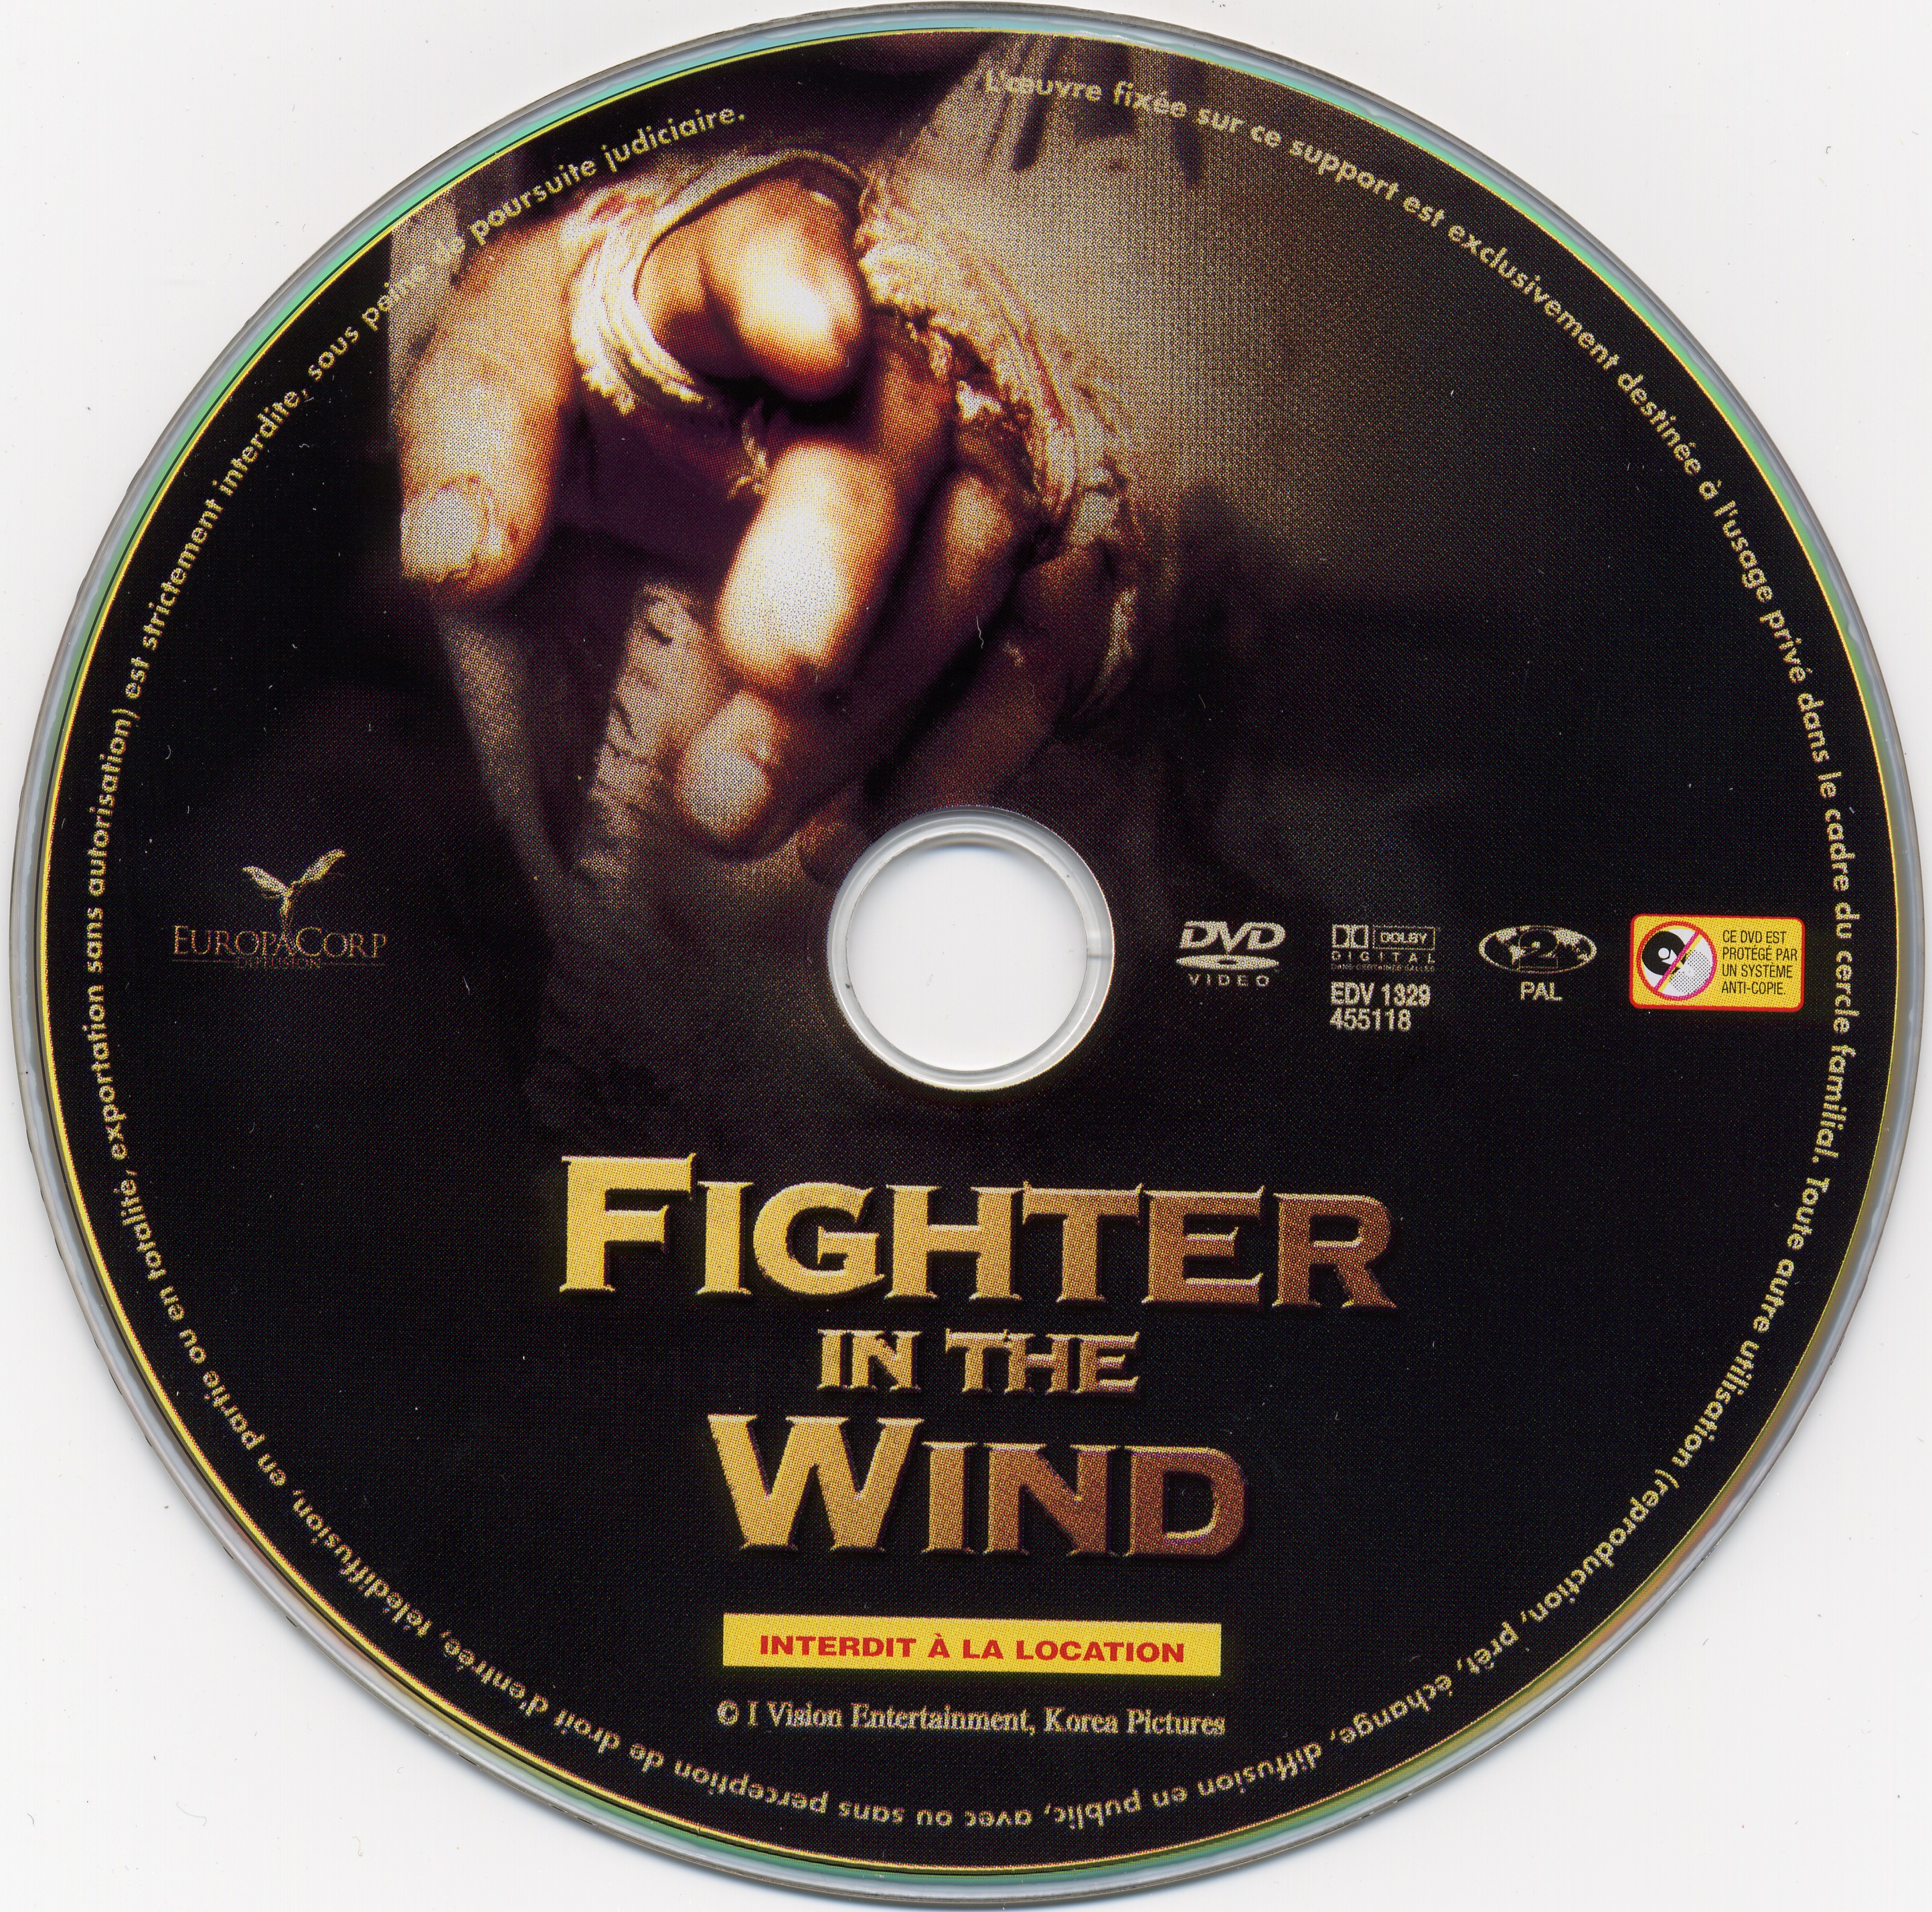 Fighter in the wind